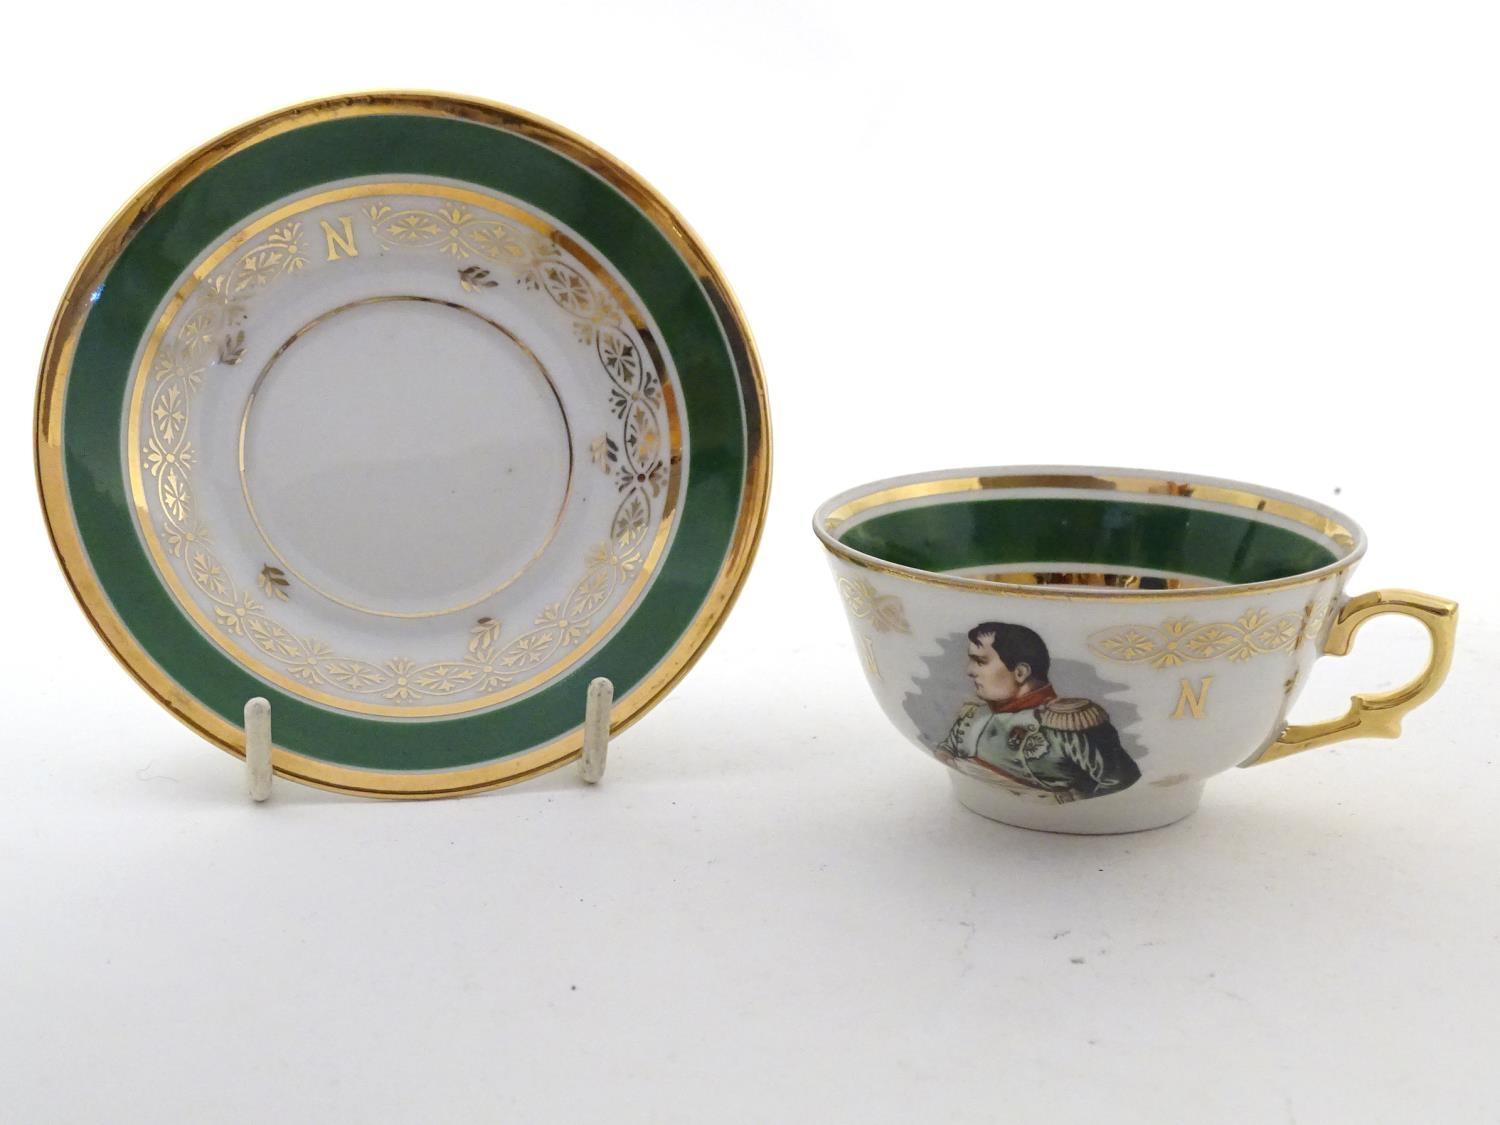 A French tea cup and saucer depicting Emperor Napoleon with green and gilt highlights. Porcelaine de